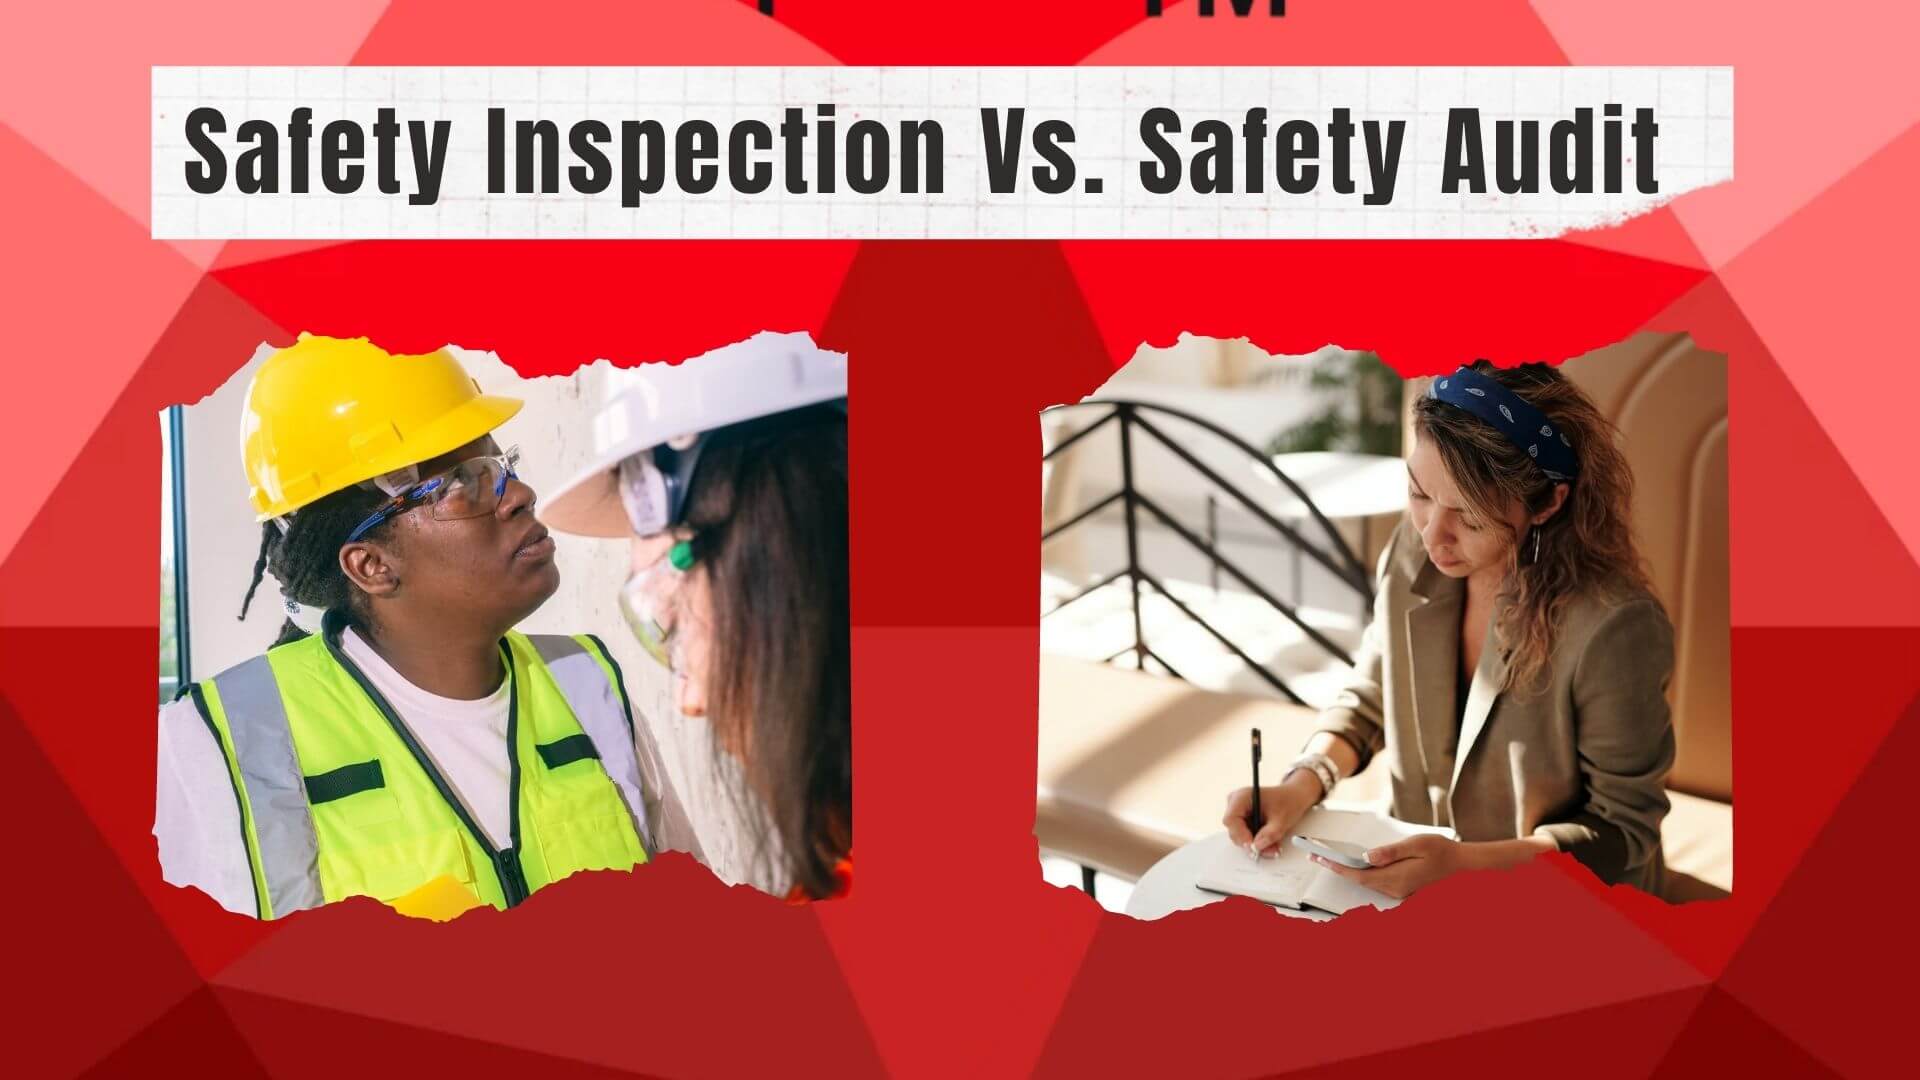 This article will discuss audit safety and inspection safety to make sure you understand why they are different from each other. Learn more!